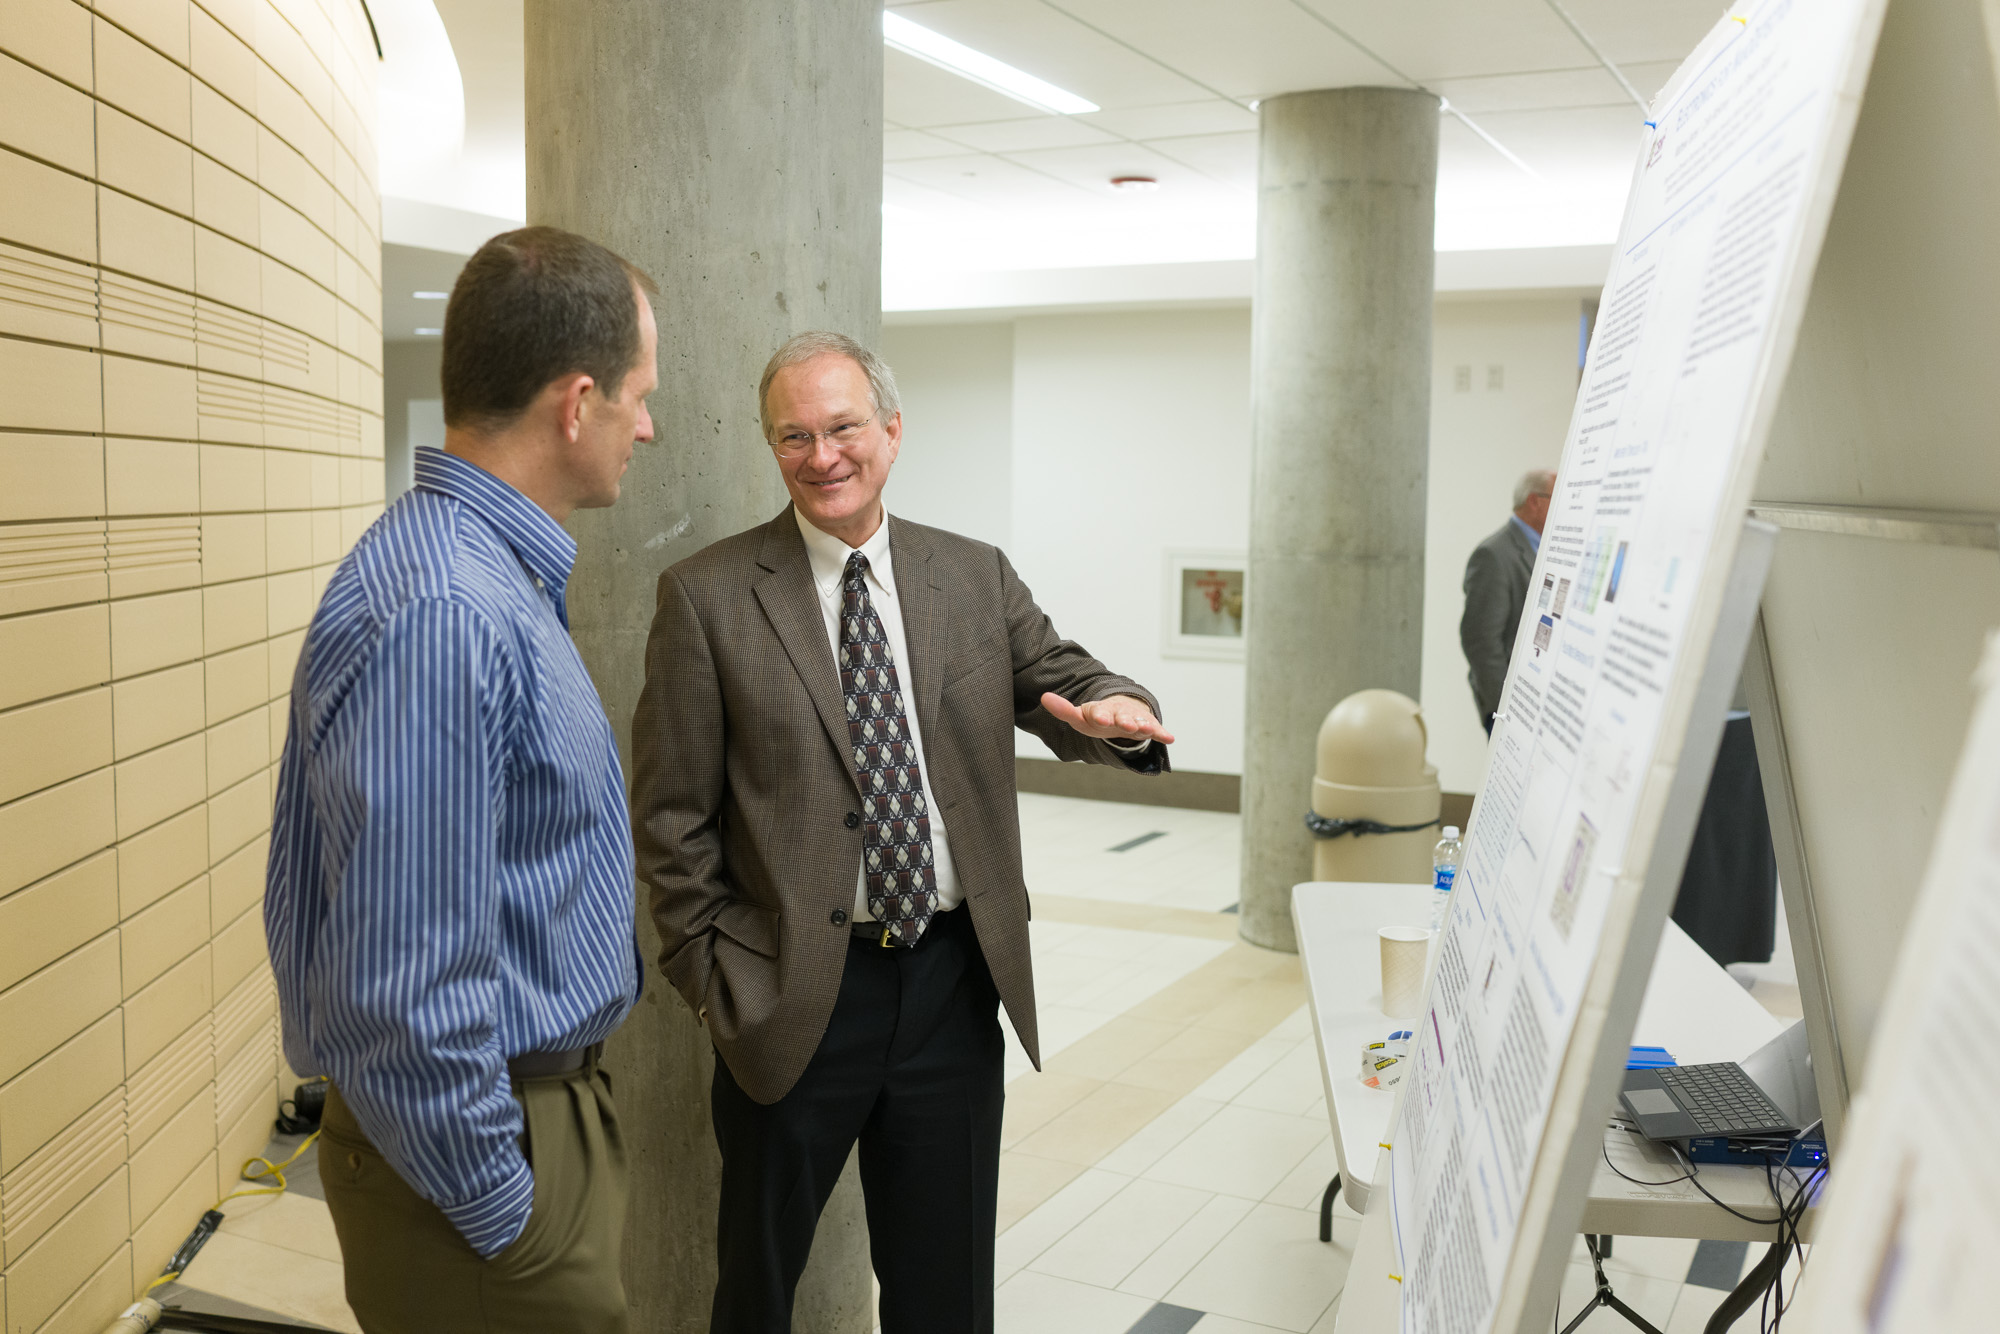 Two men converse near a scientific poster at a conference, with one gesturing towards something.